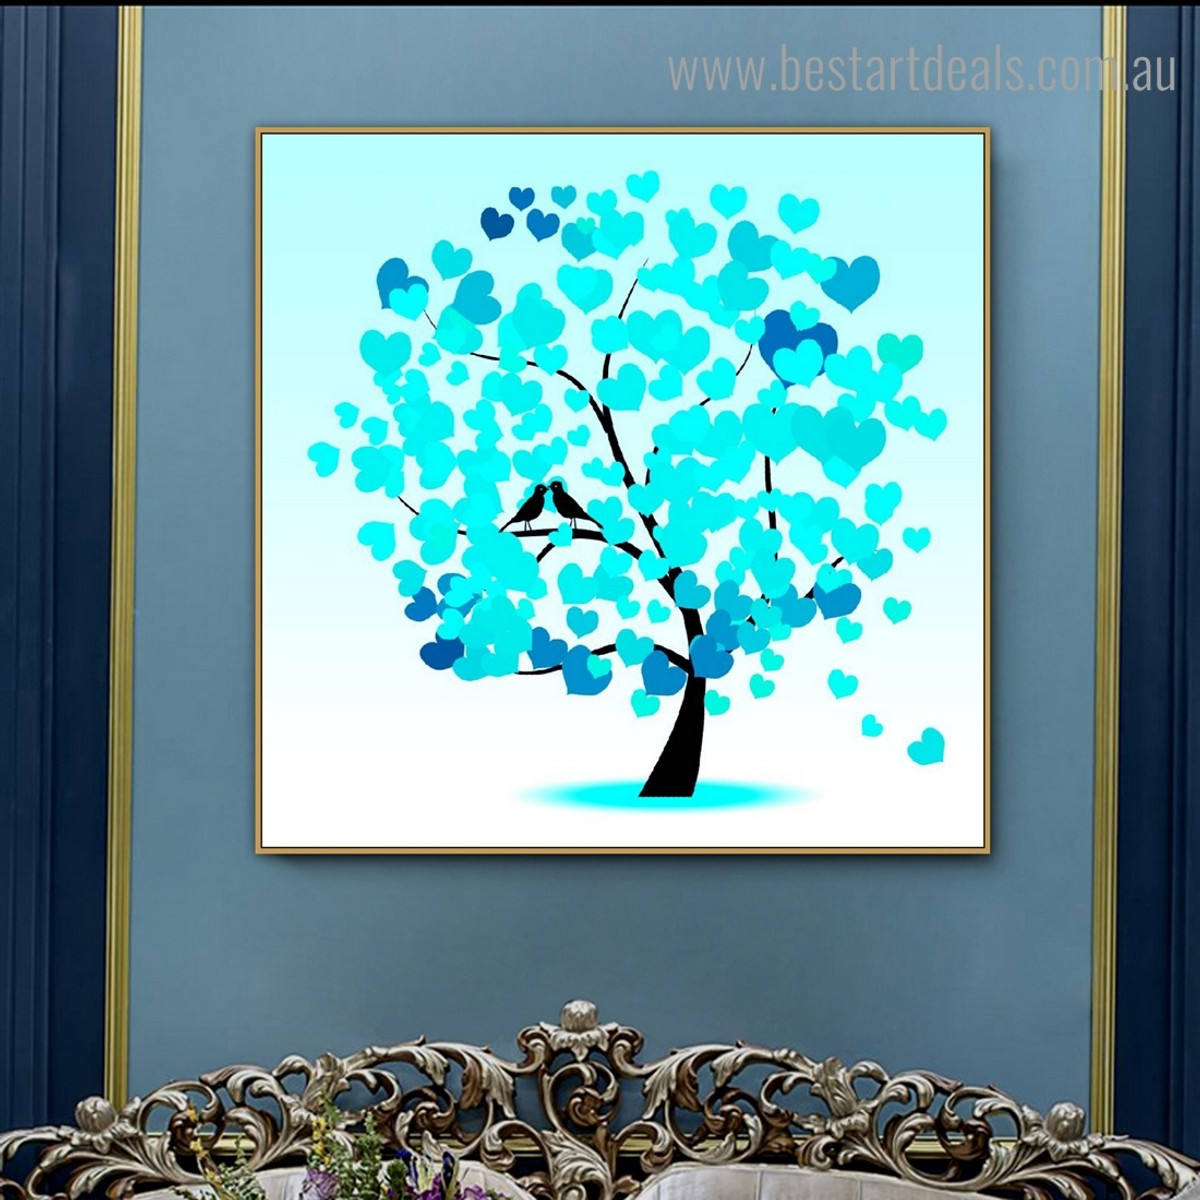 Blue Heart Leaves Abstract Framed Painting Image Canvas Print for Room Wall Garnish